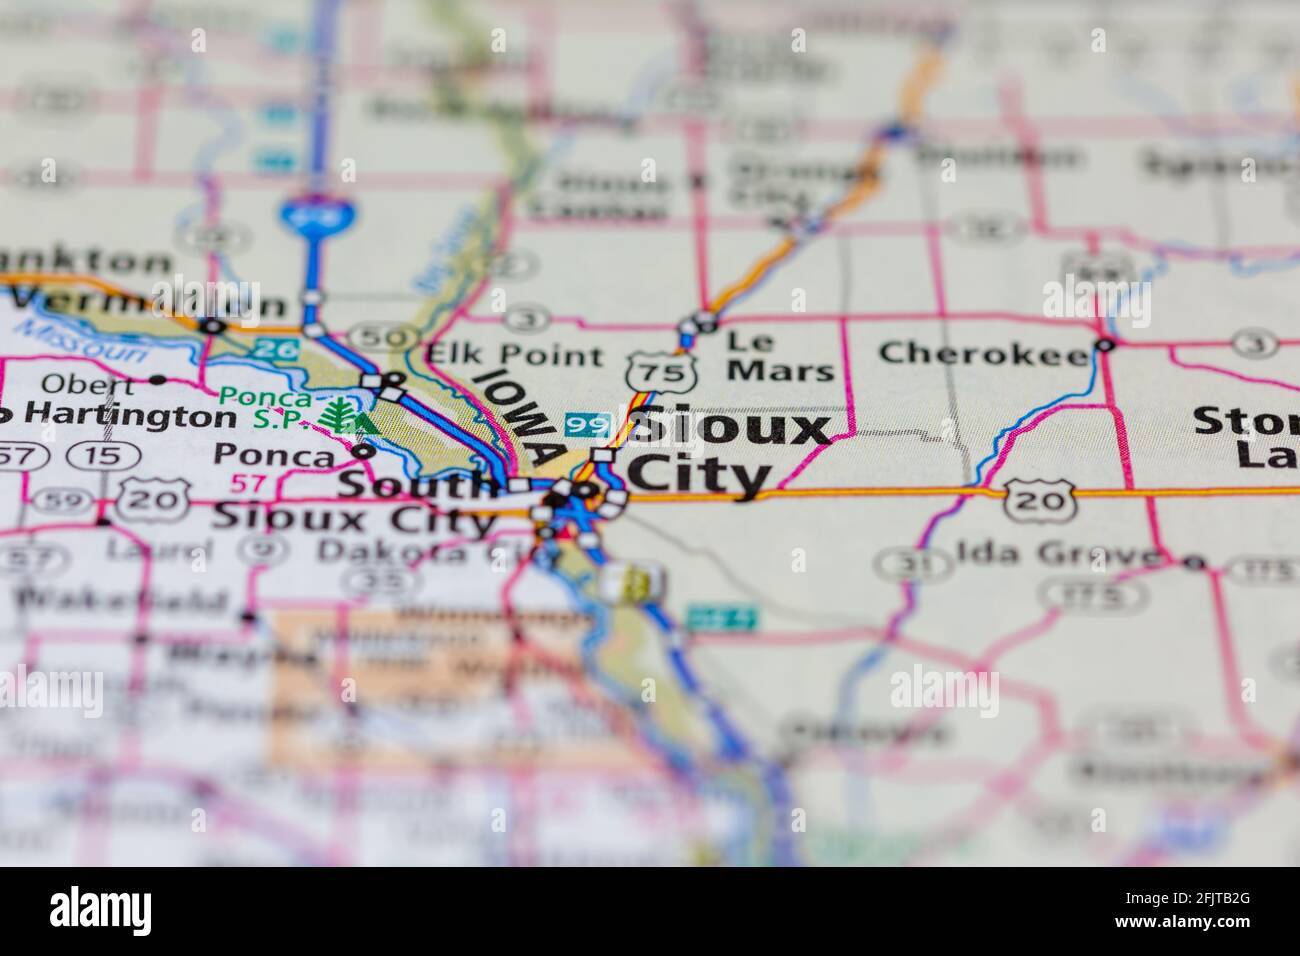 Sioux City iowa USA and surrounding areas Shown on a road map or Geography map Stock Photo